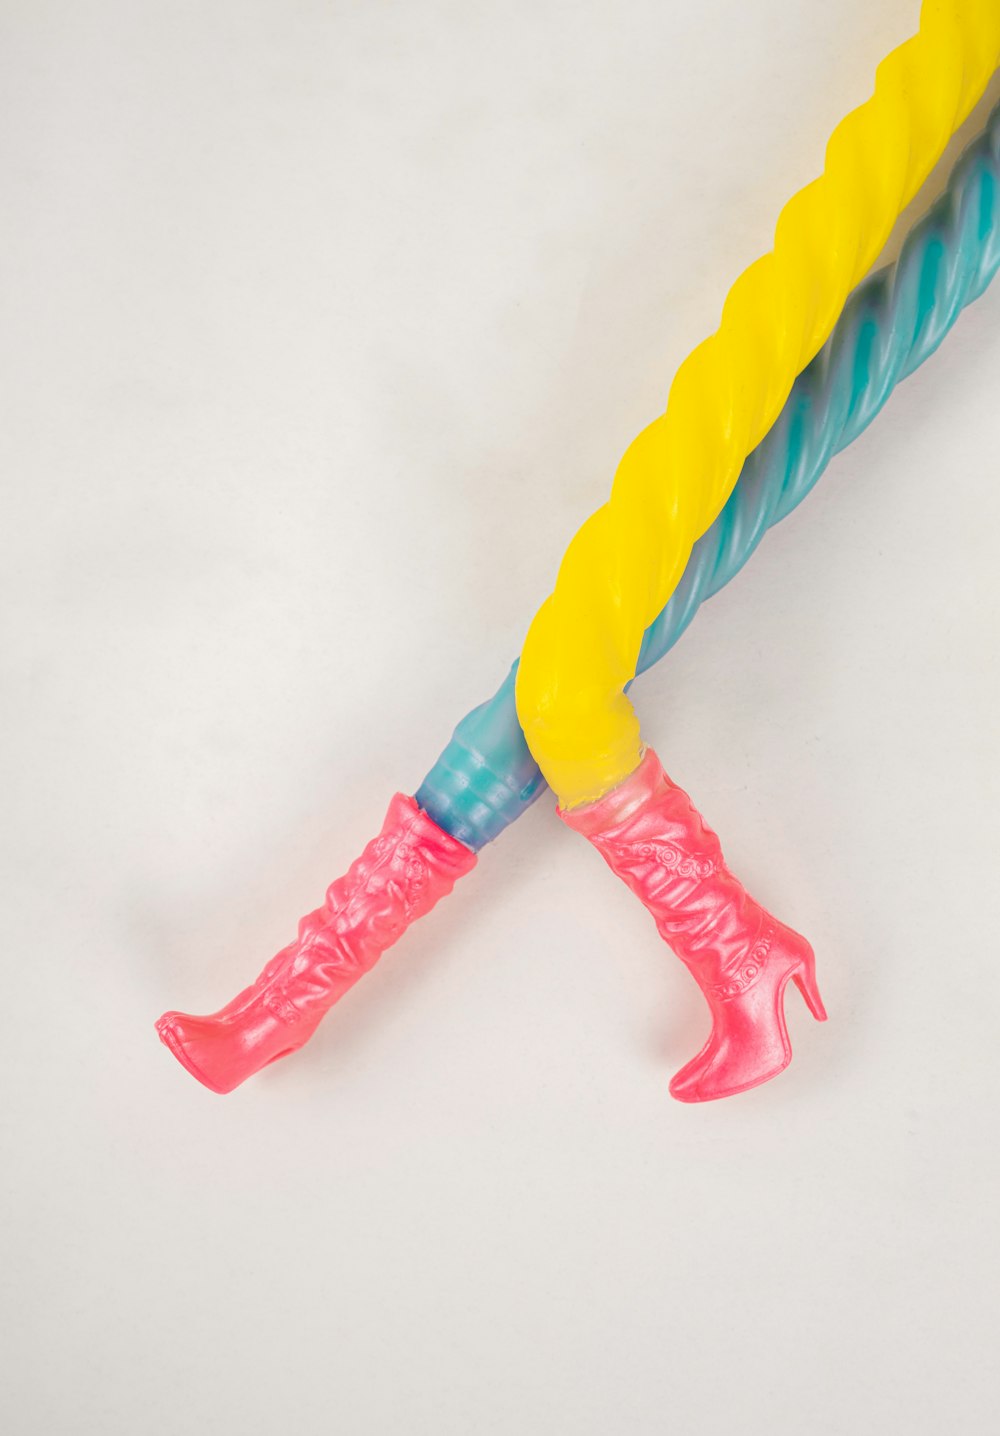 a plastic toothbrush with a yellow and blue handle